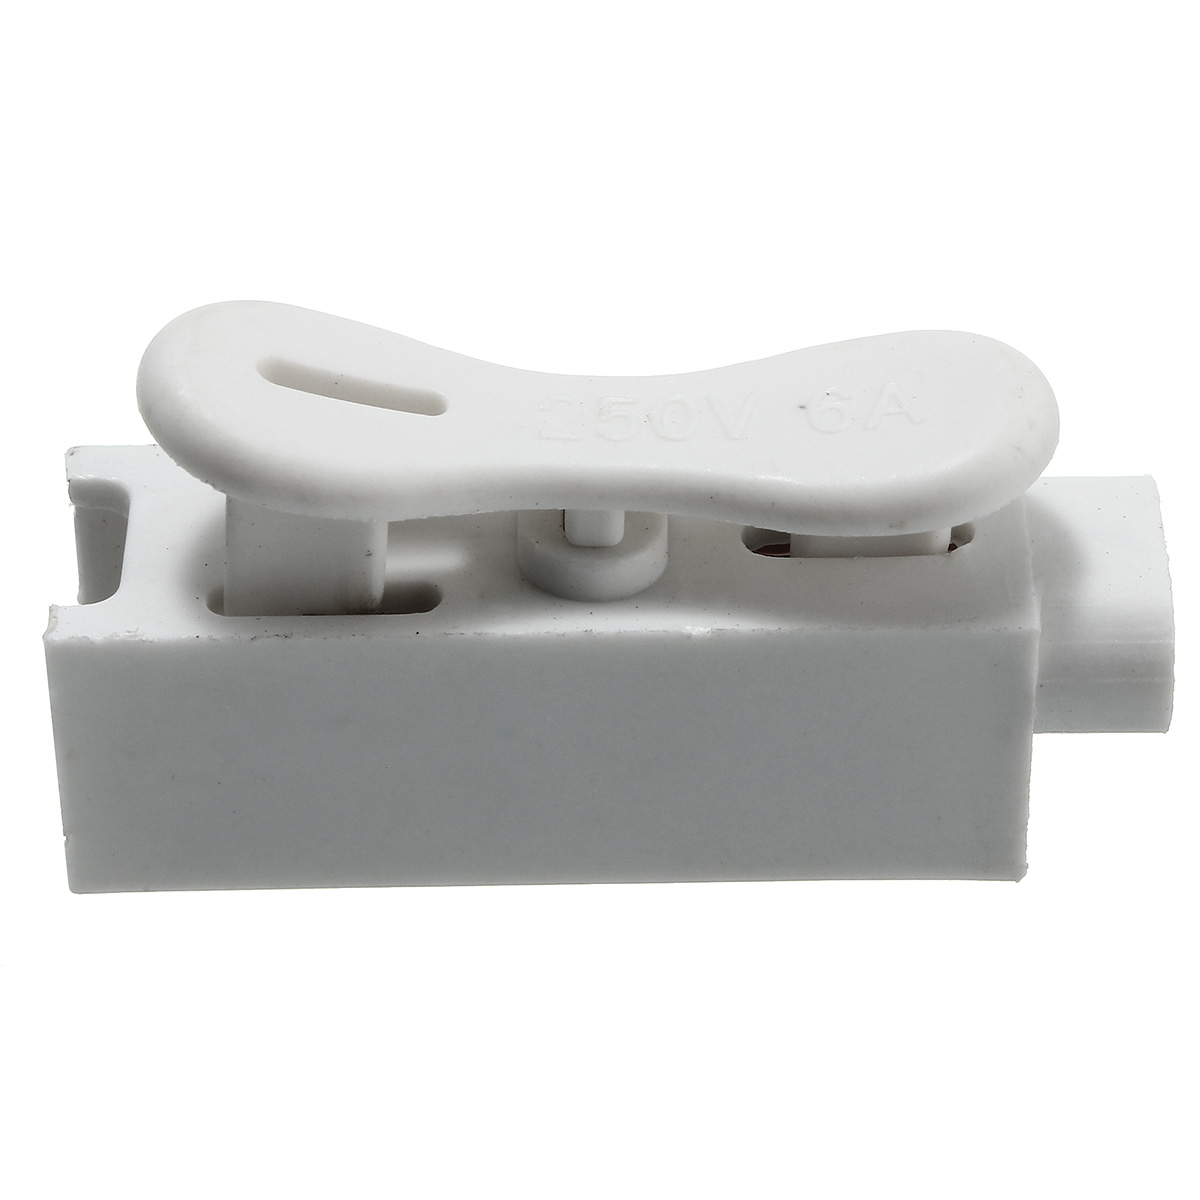 1-Pin-Quick-Fix-Push-in-Clip-Spring-Connector-Cable-Terminal-Block-for-3528-5050-LED-Strip-1162328-3